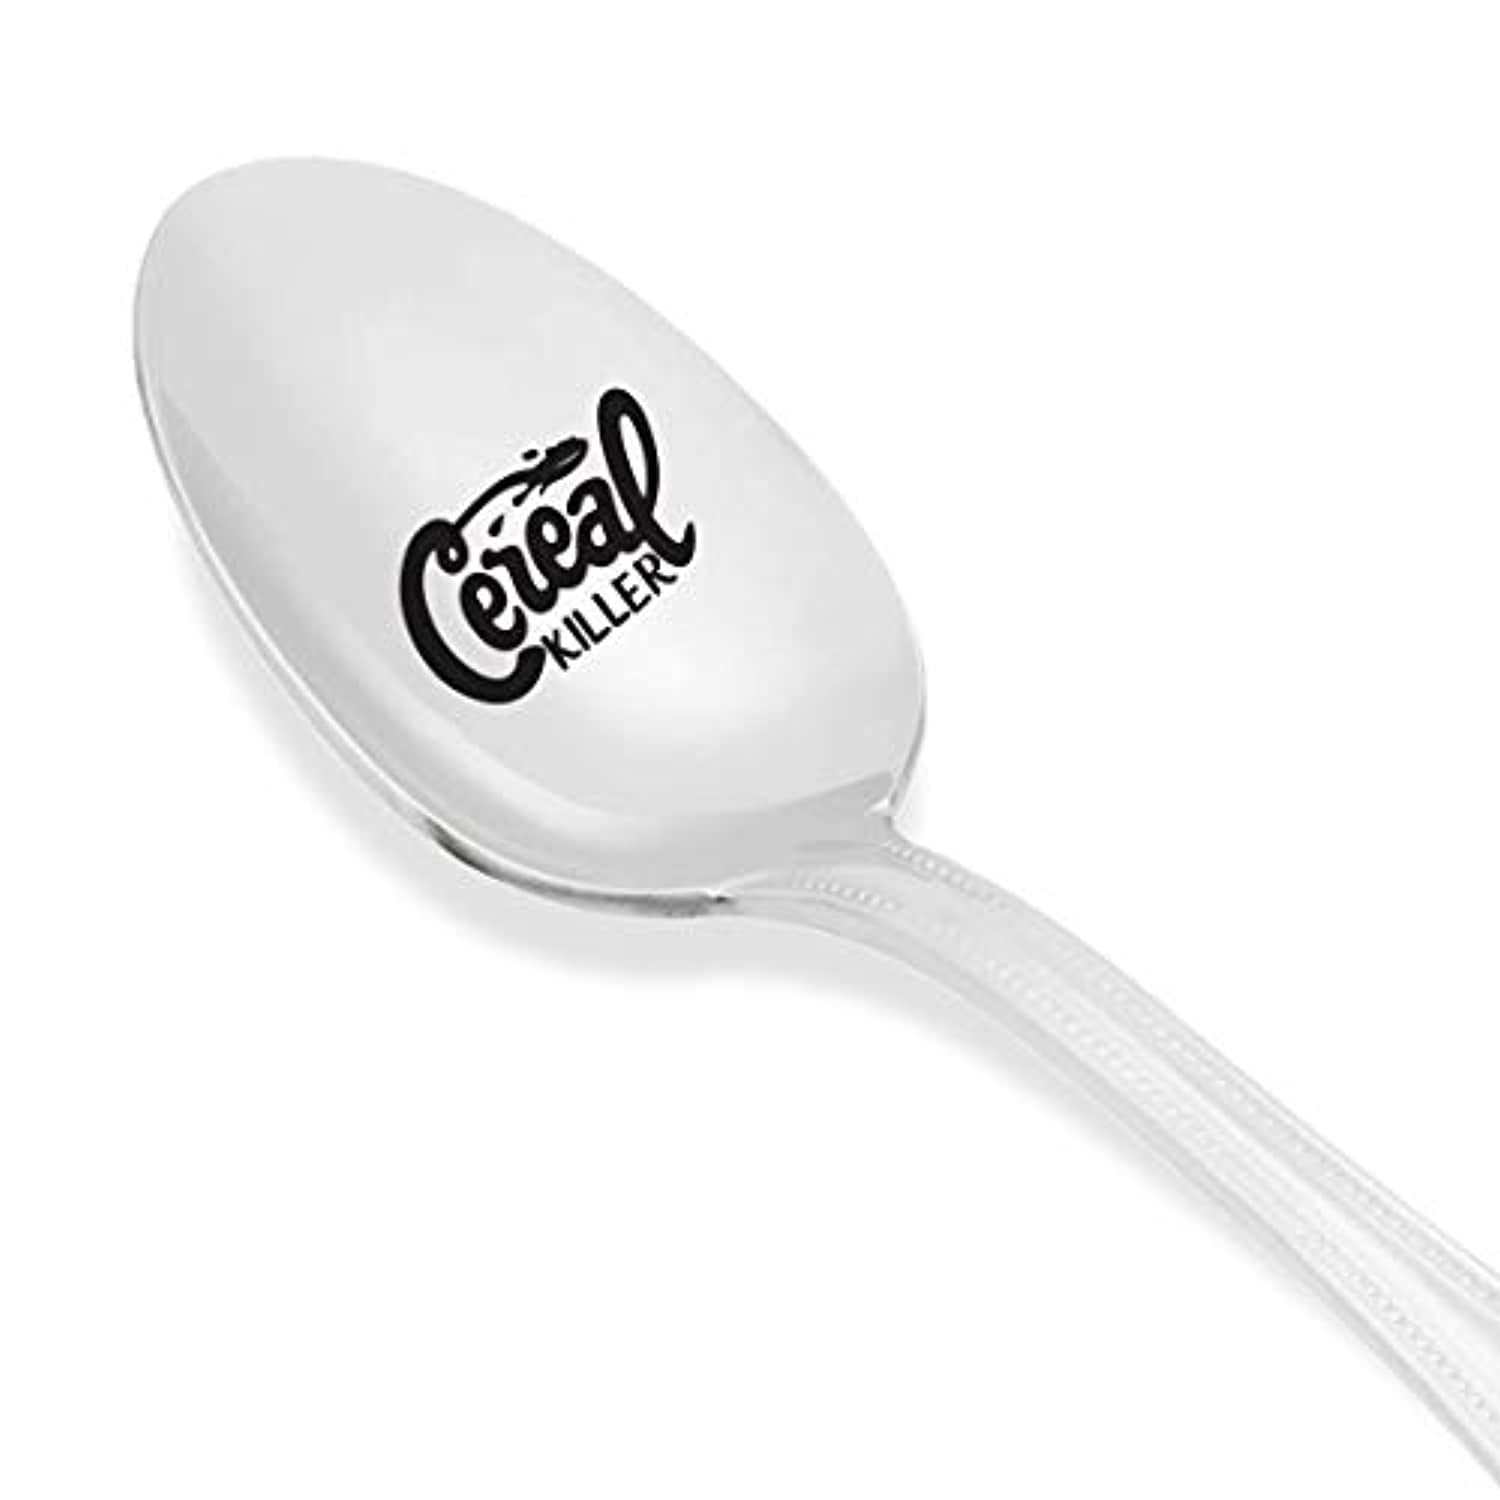 2 Pack Custom Made Stamped Spoon Set Cereal Killer and I Cerealsly Love You Cereal Spoon